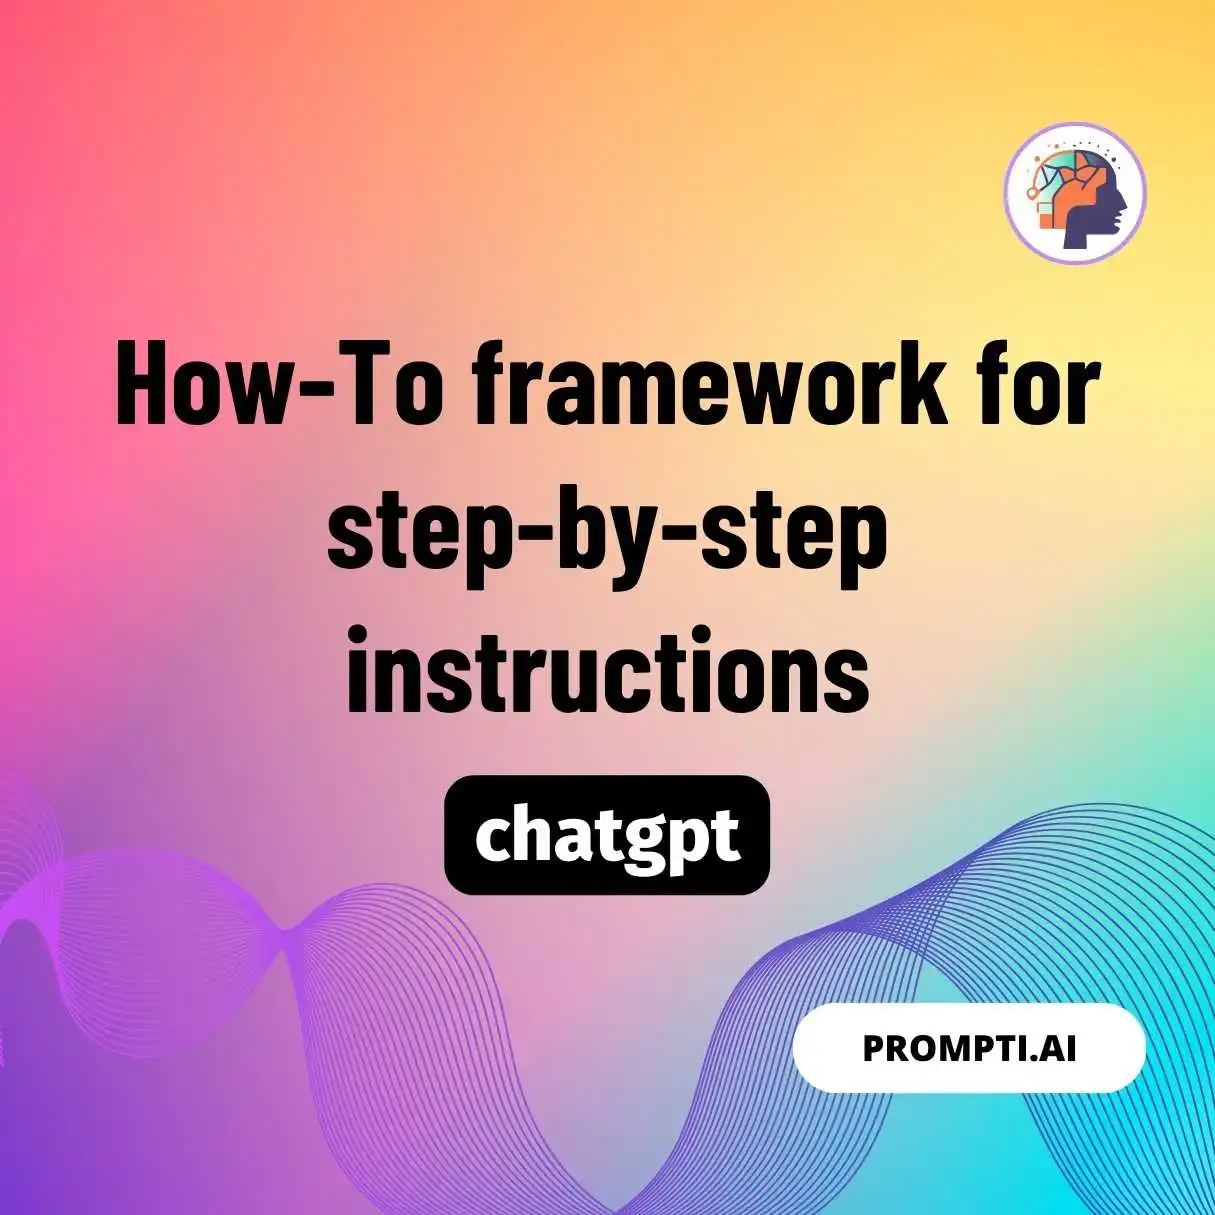 How-To framework for step-by-step instructions